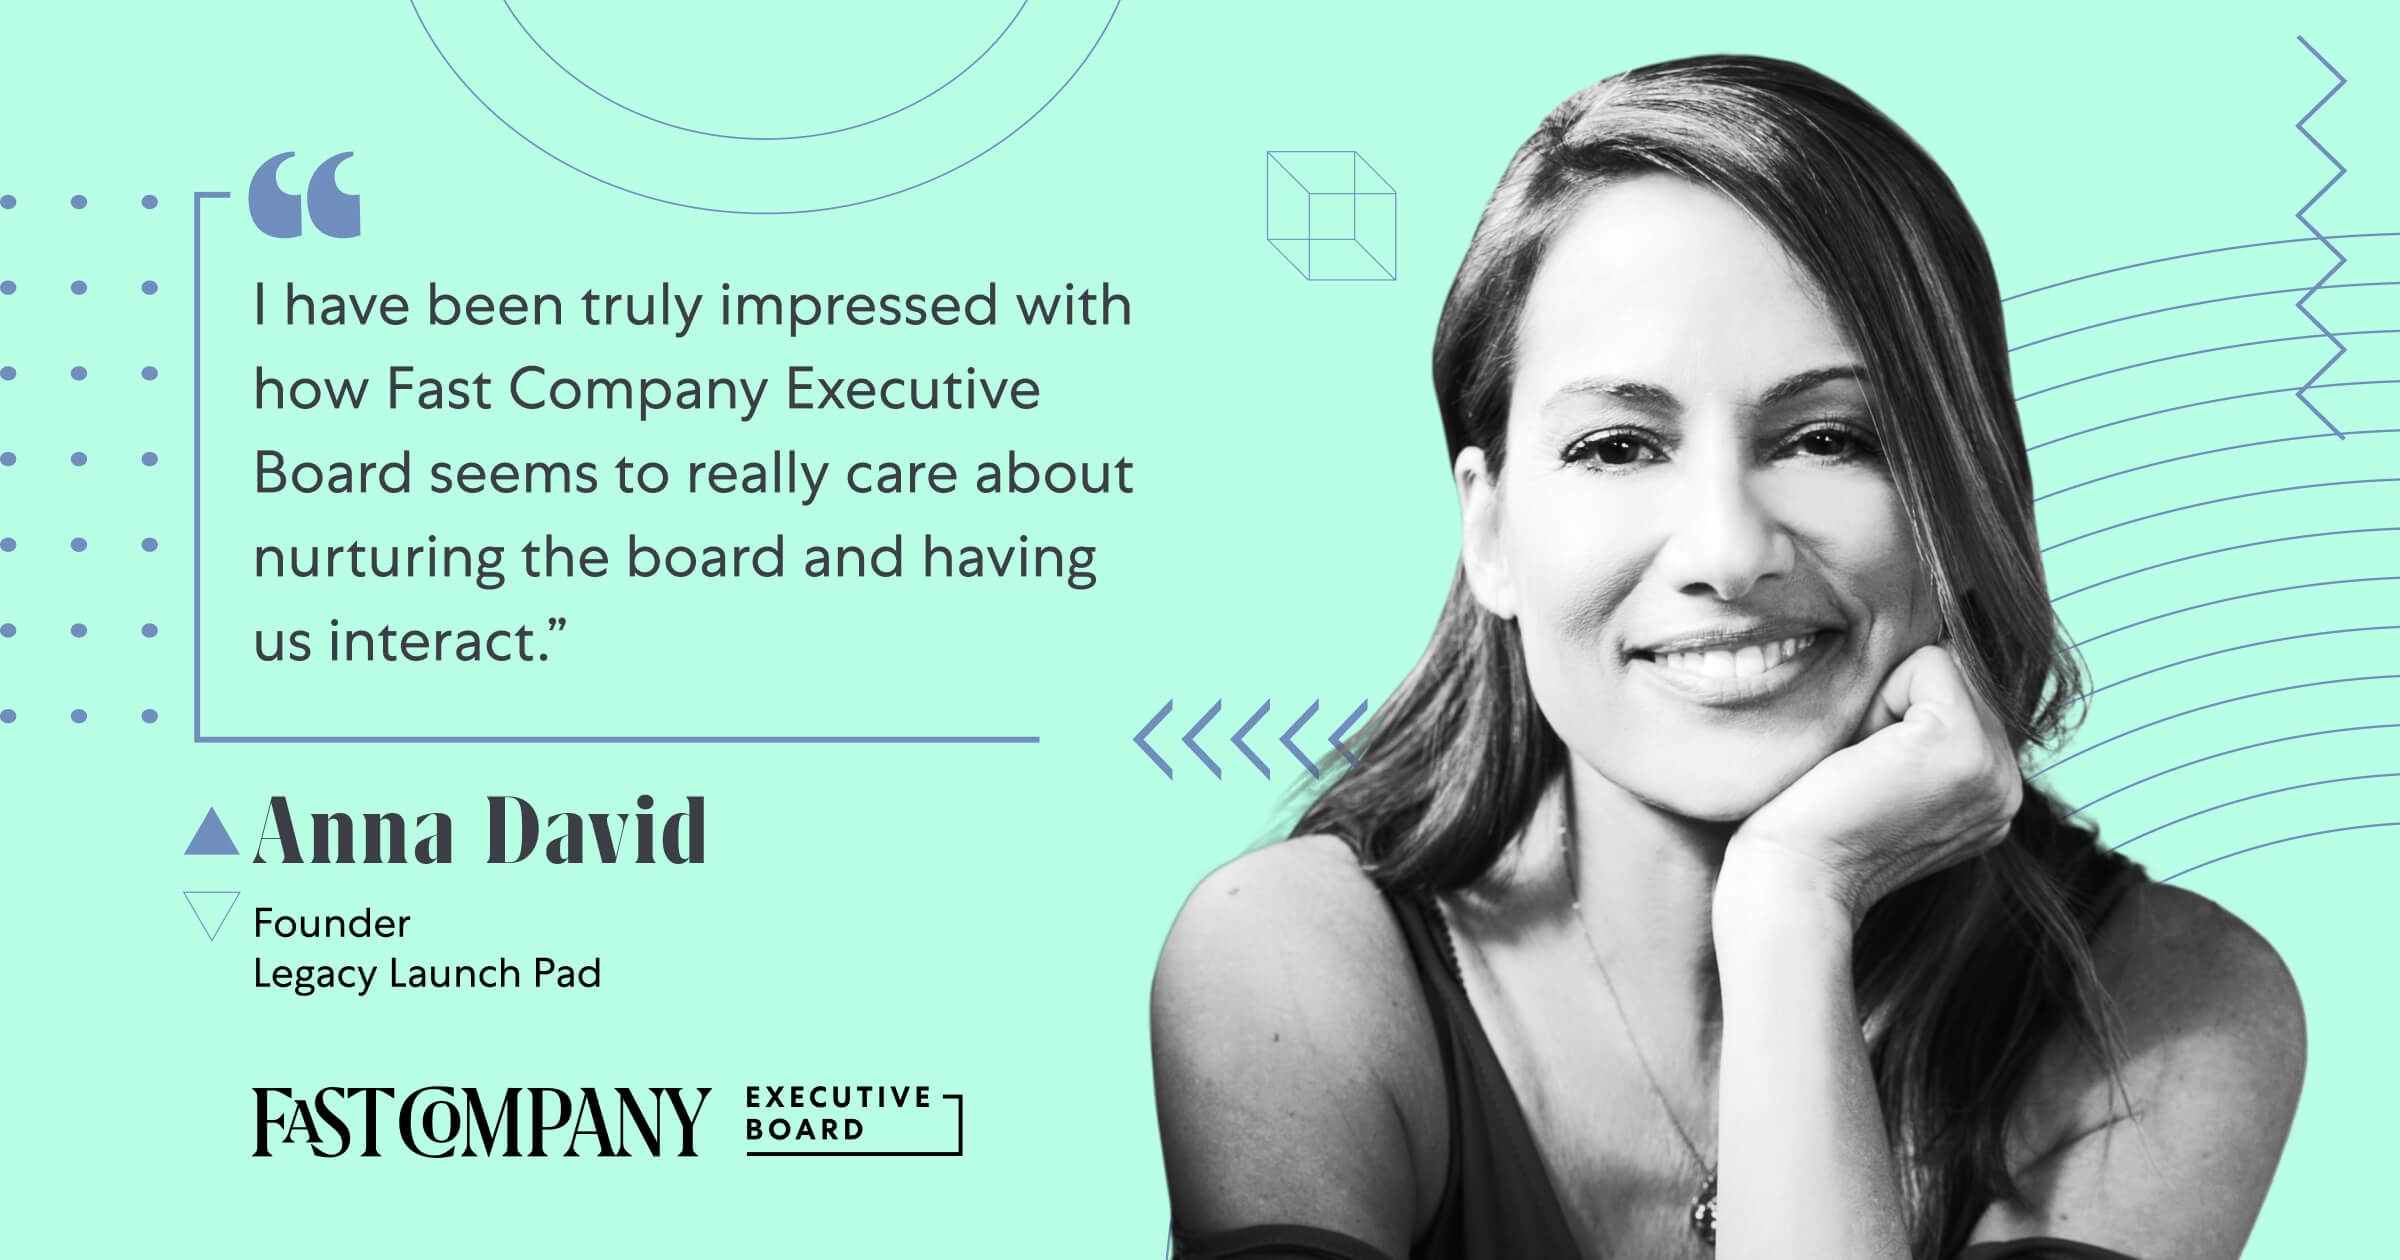 Fast Company Executive Board Forum Gives Anna David Industry Insight